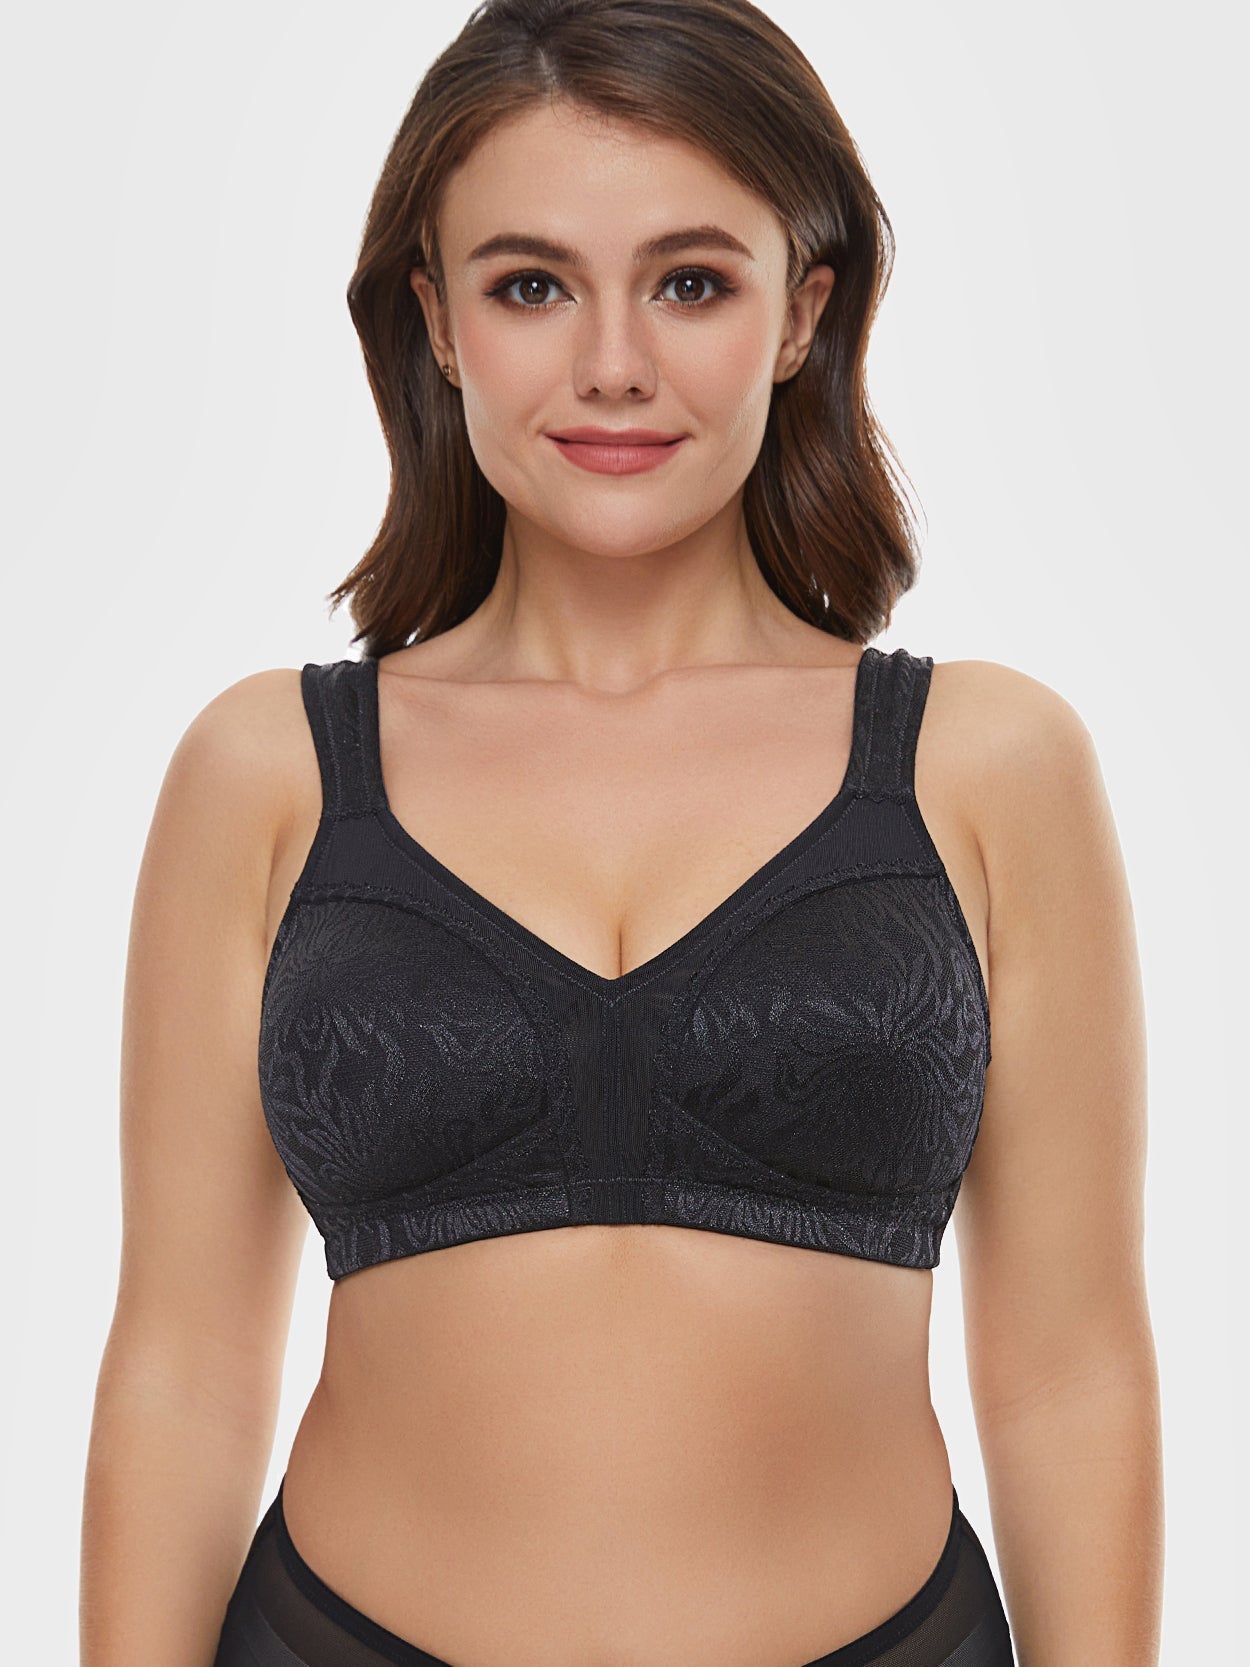 Full Cup Jacquard Lace Bra Women Breast From 80D To 115E